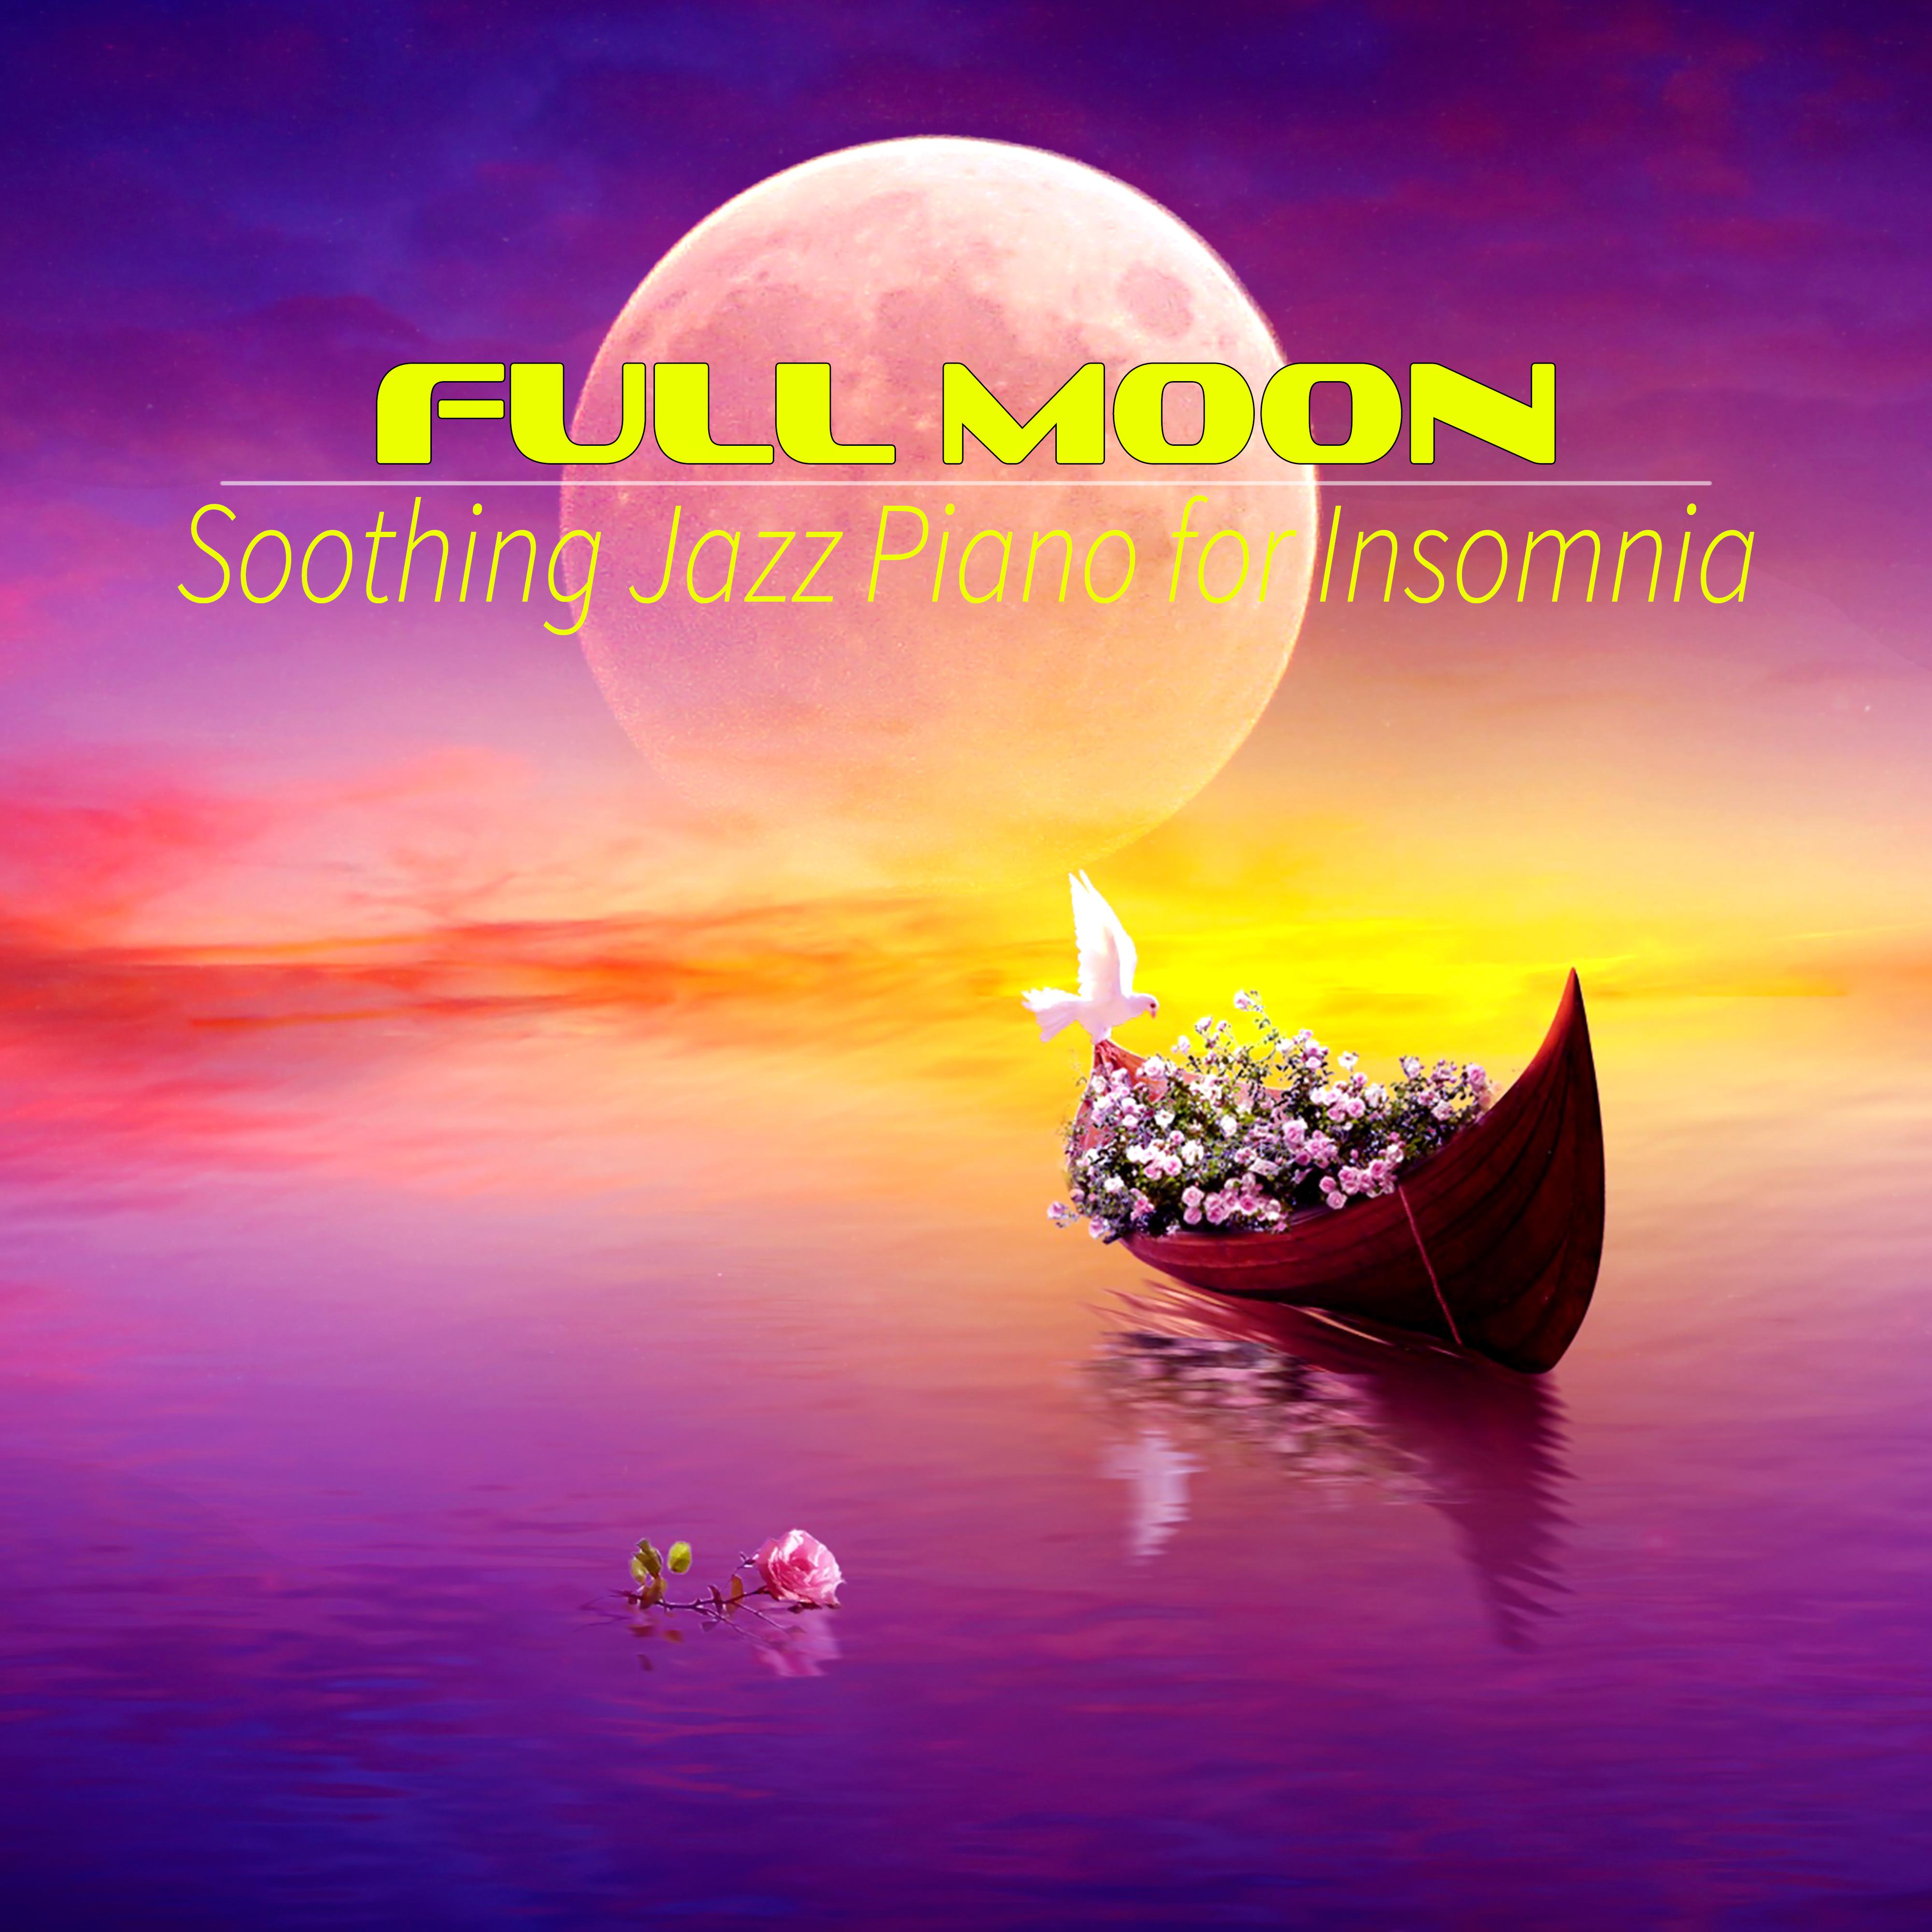 Full Moon - Slow Relaxing Night Music for Deep Sleep Hypnosis, Calming Music, Soothing Jazz Piano for Insomnia